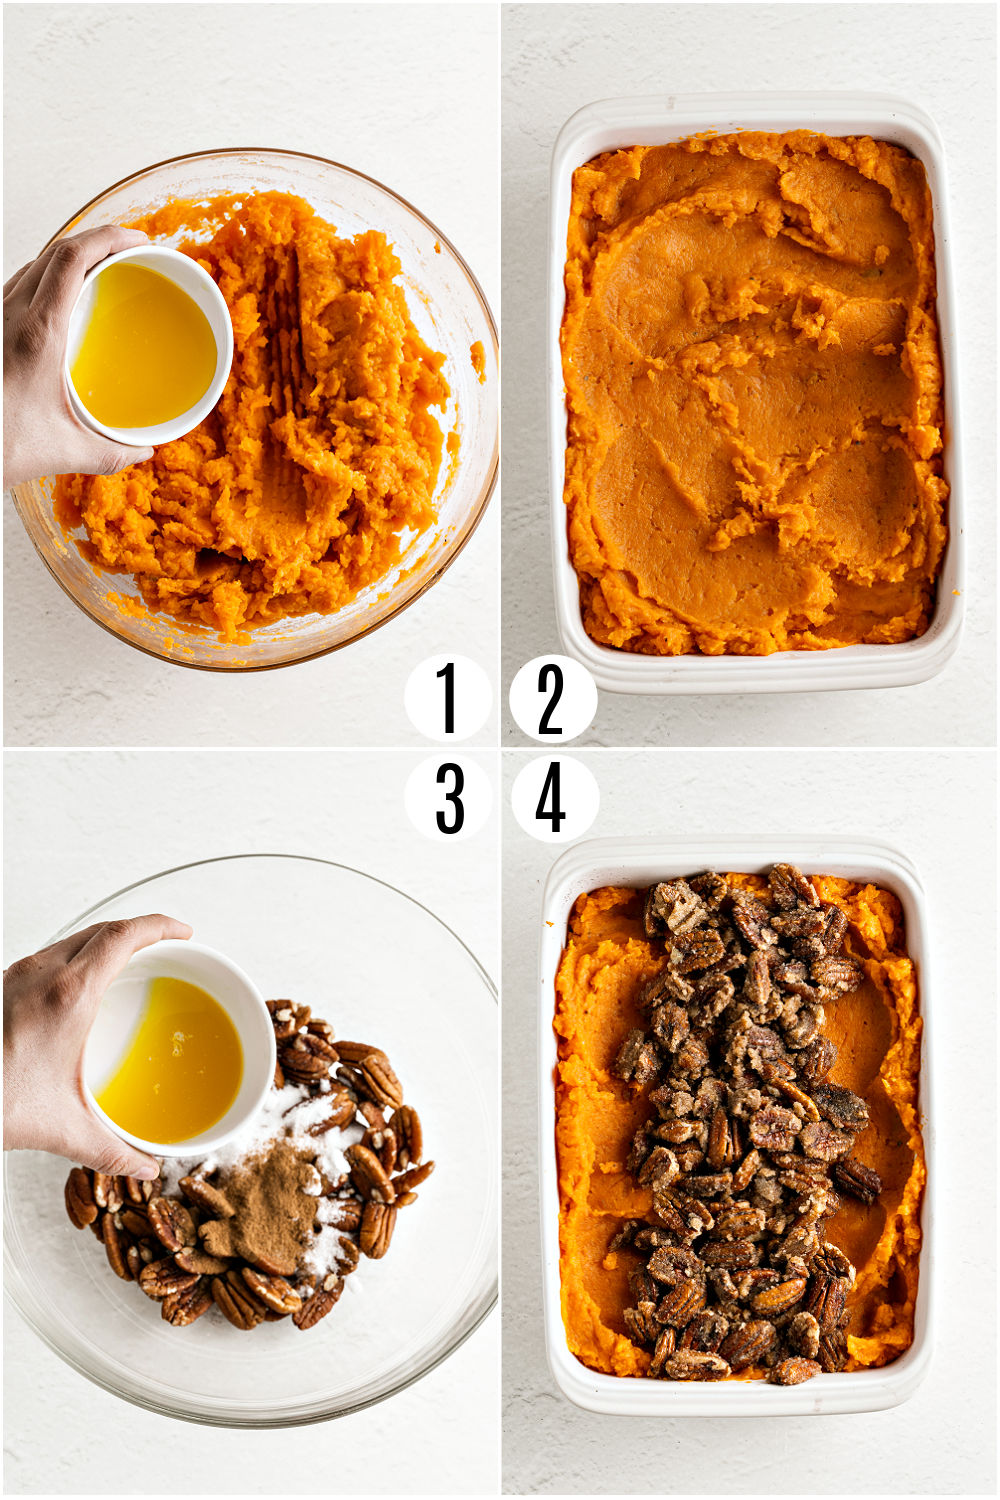 Step by step photos showing how to make sweet potato casserole.